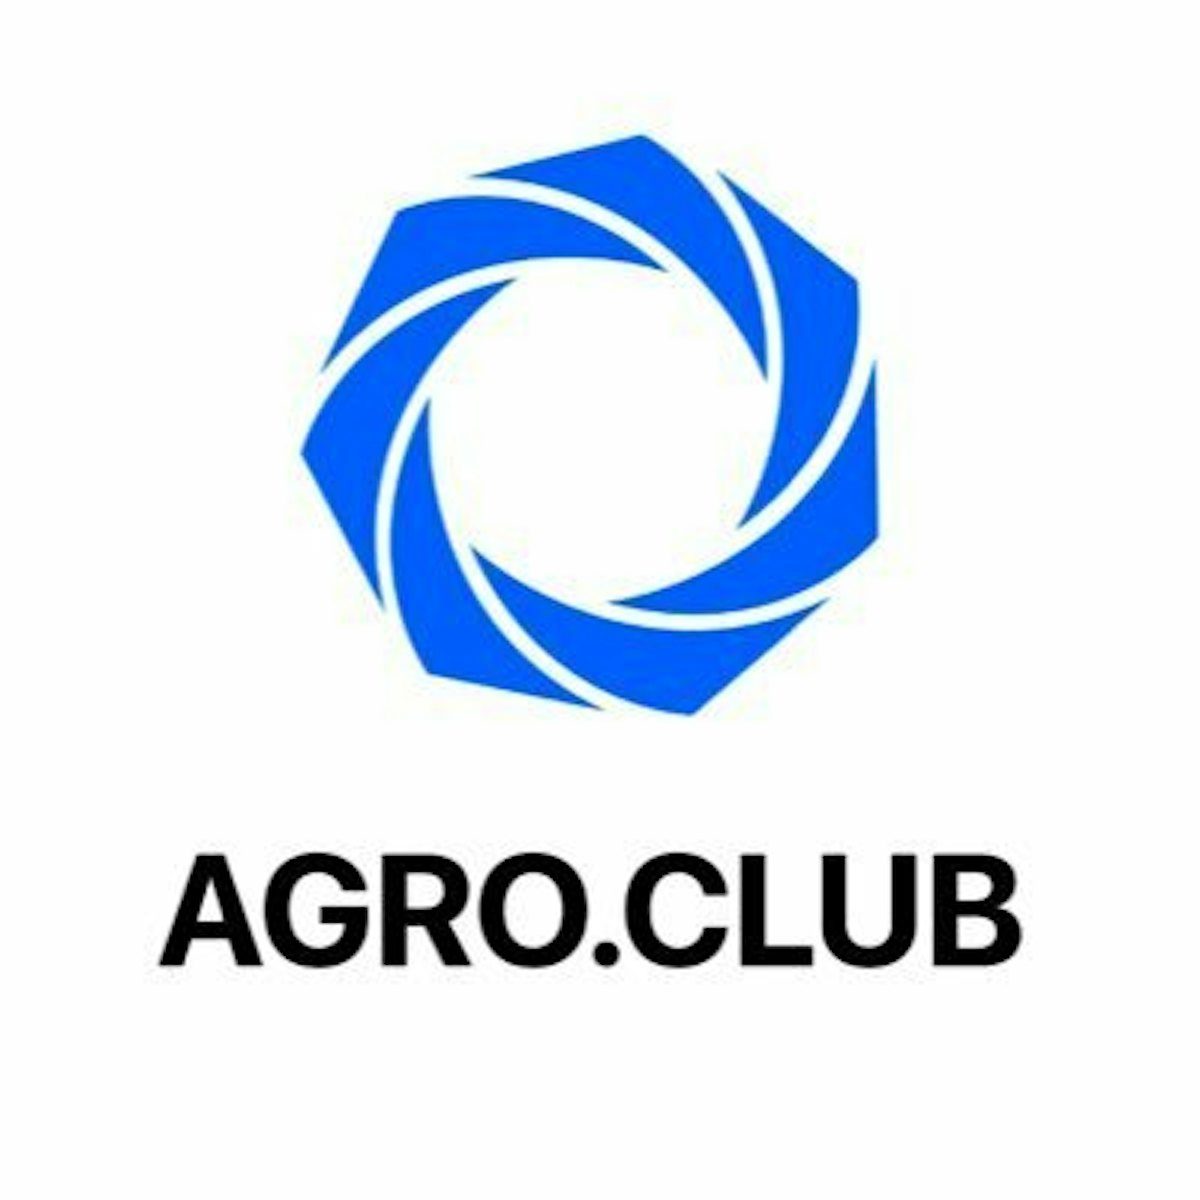 Pedro Salles, a top agribusiness executive, joins Agro.Club in Brazil to  lead growth and development in the country